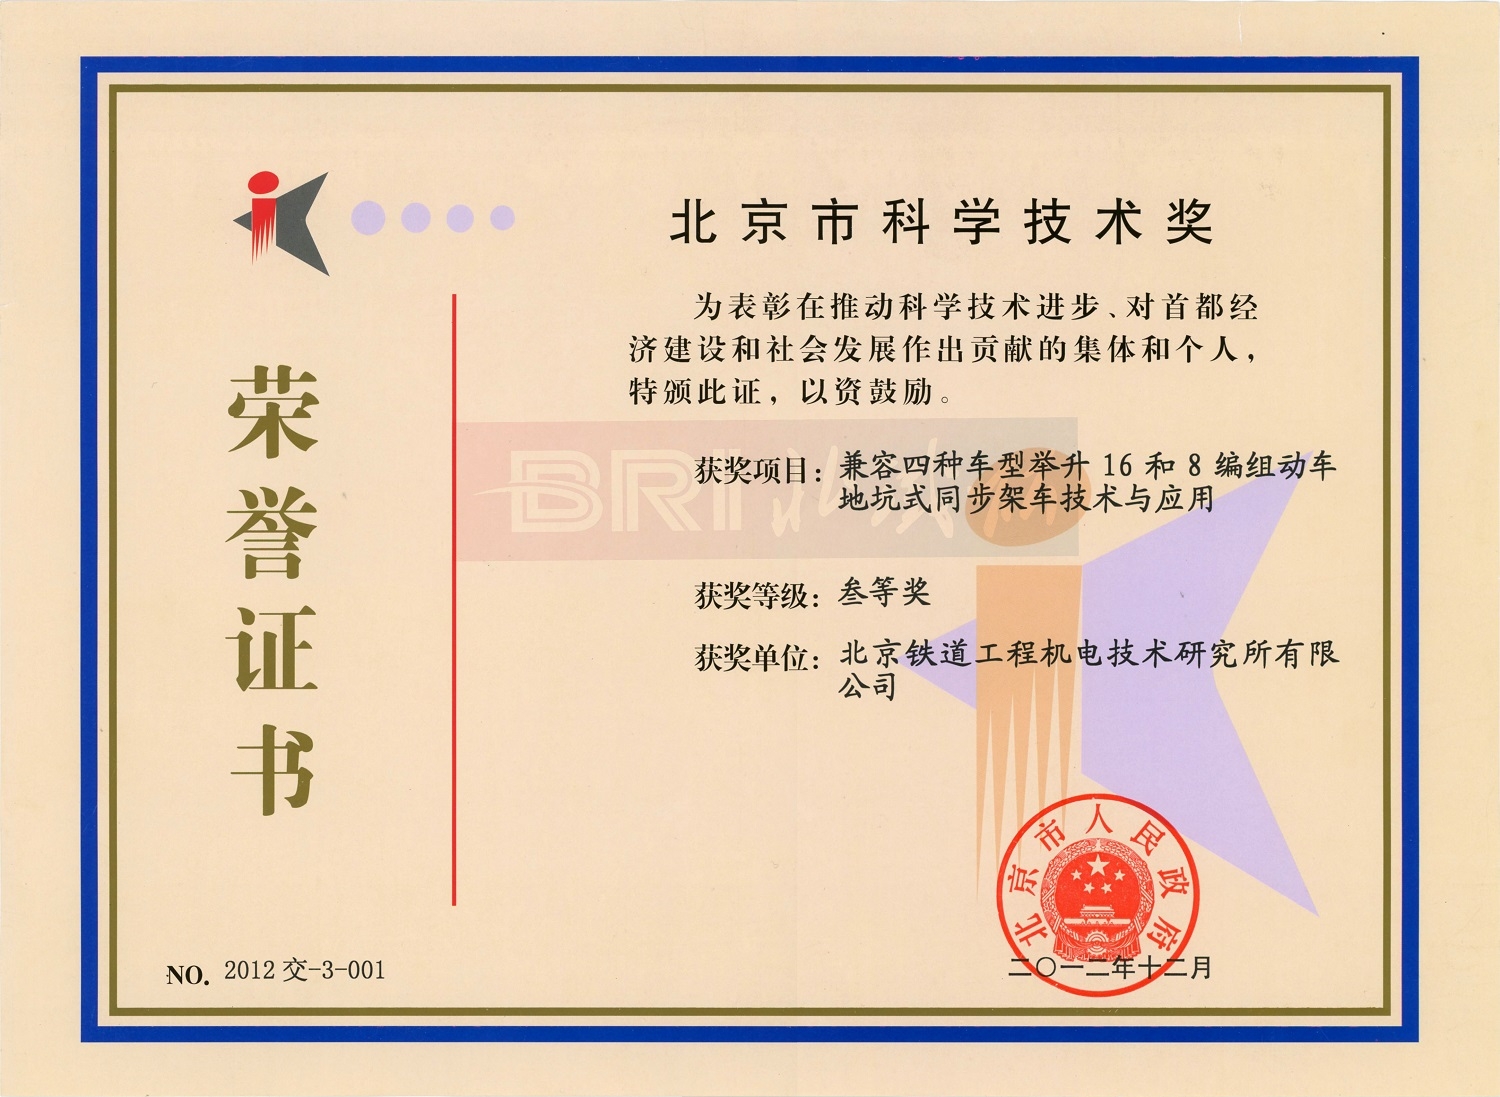 The third prize of Science and Technology in Beijing 